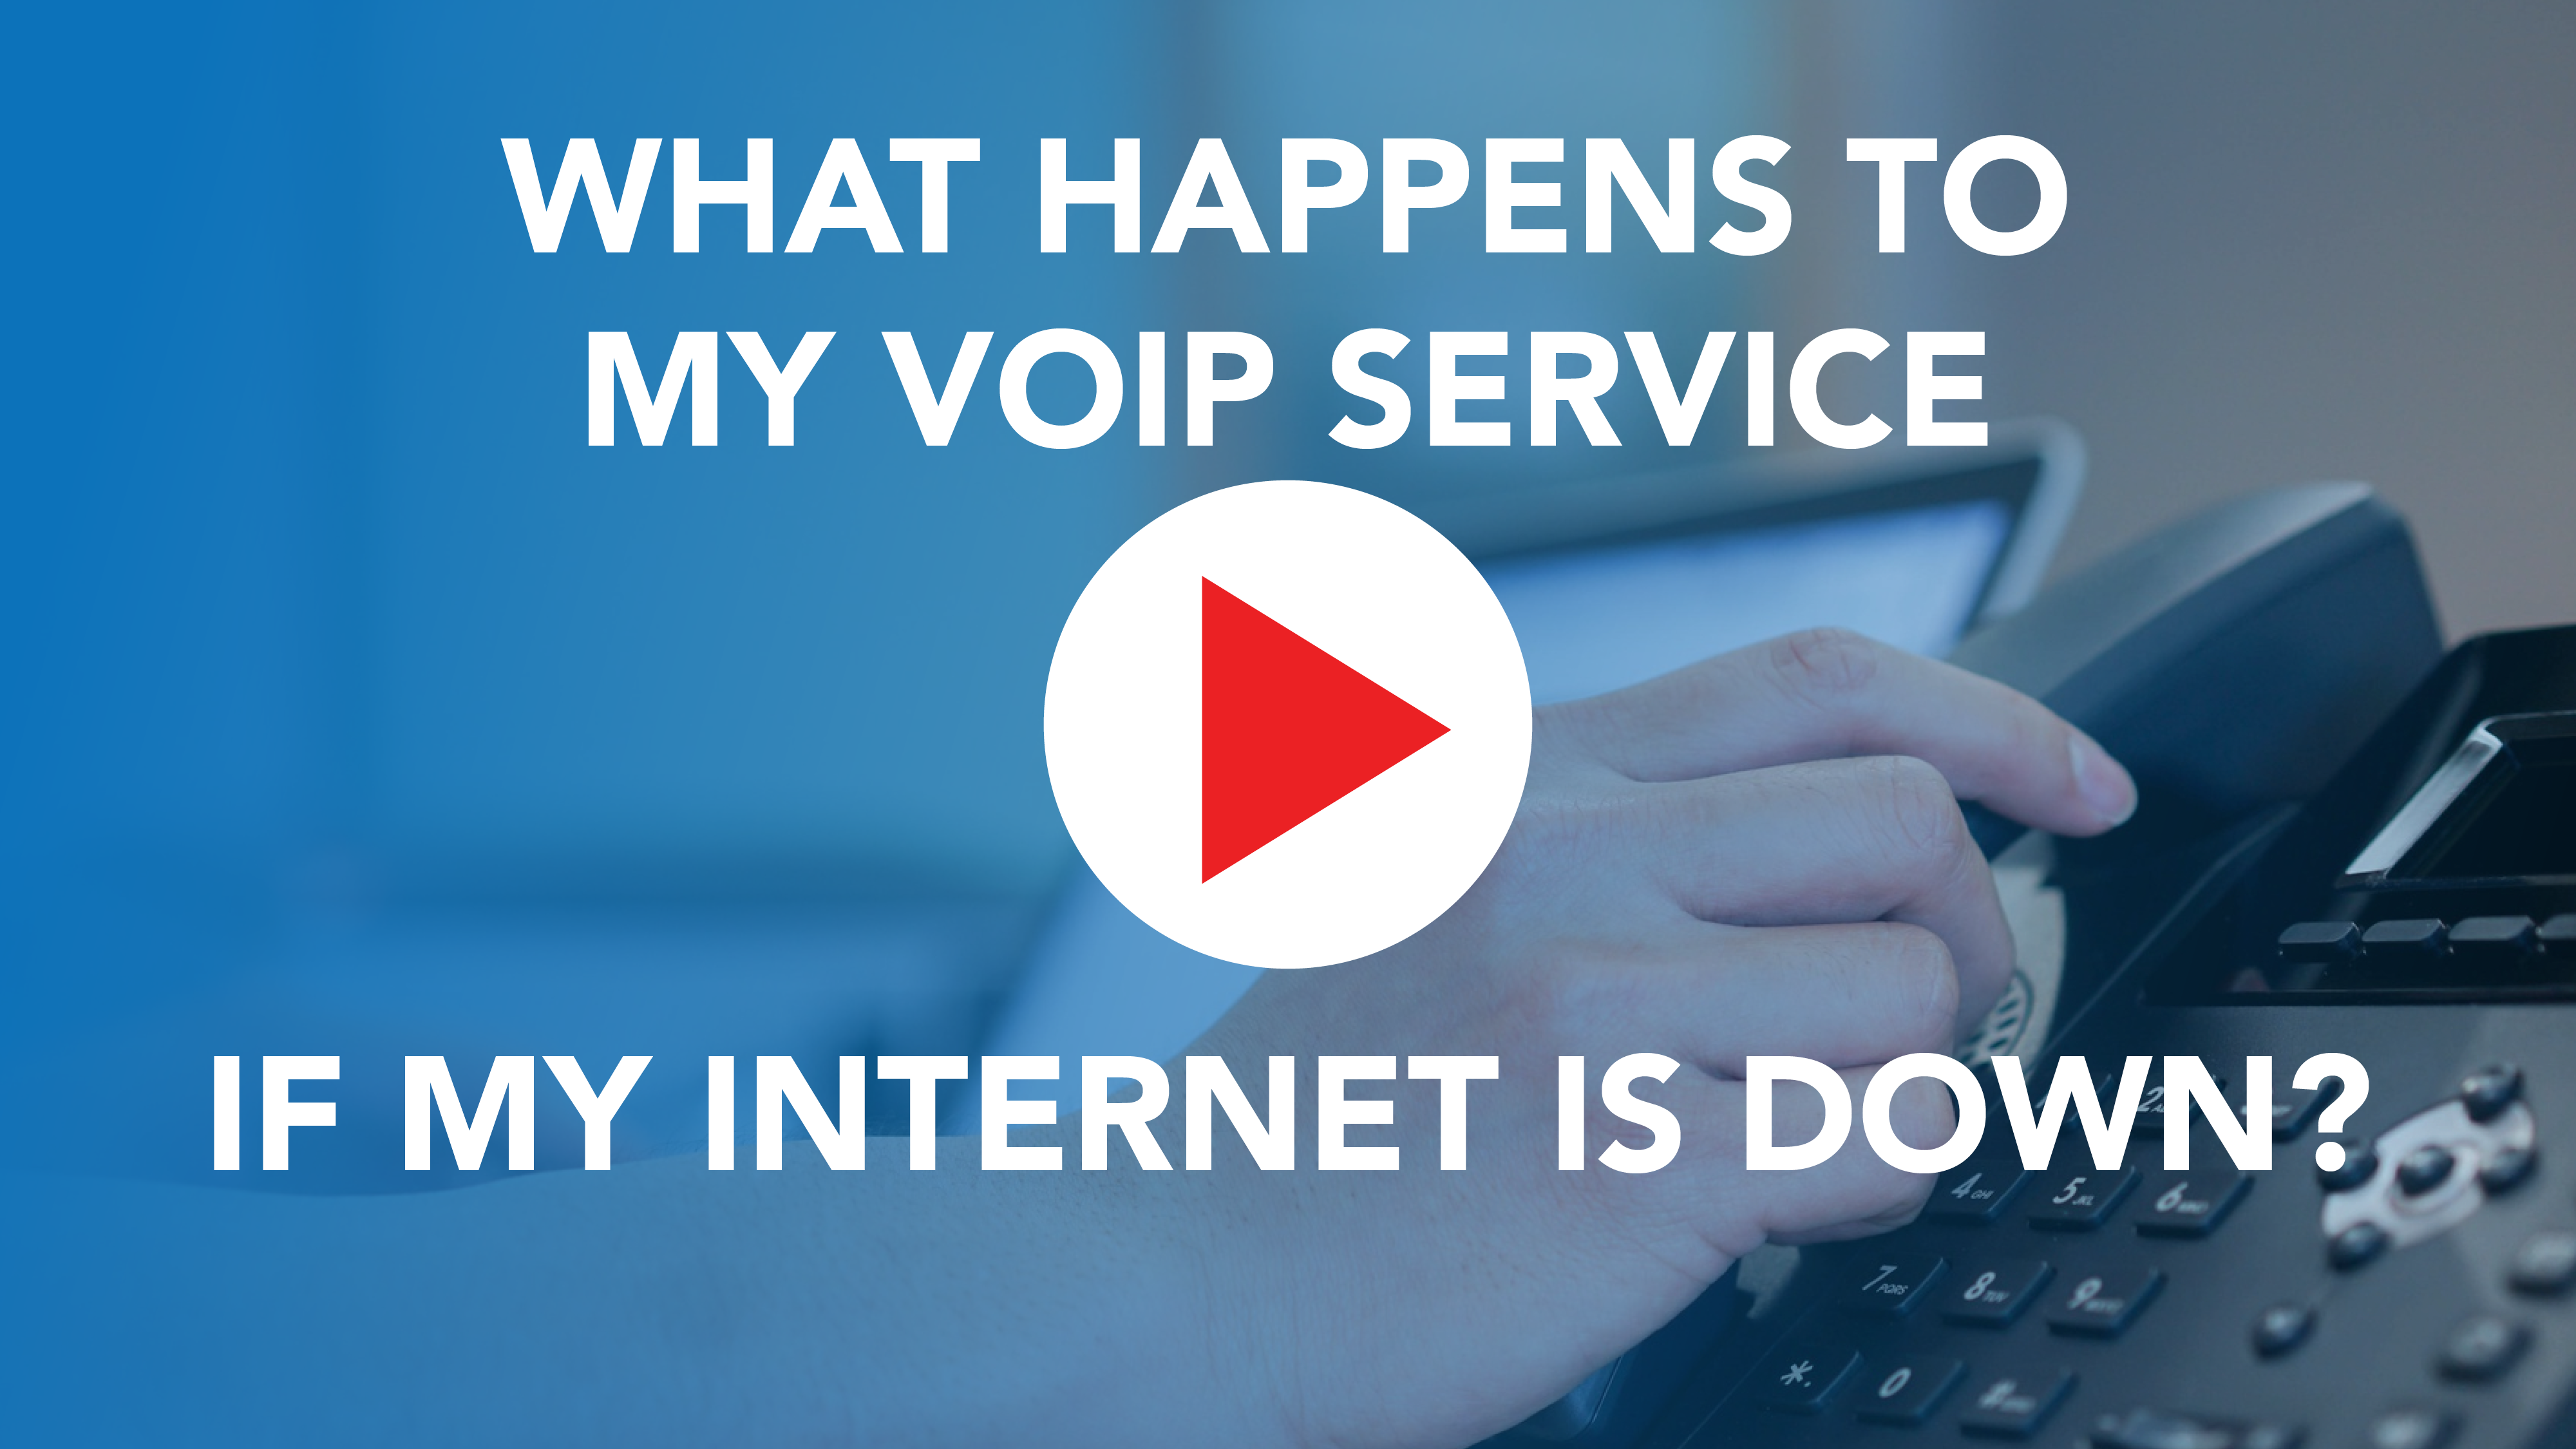 Video Title Card VoIP - What Happens to My VoIP Service if My Internet Is Down